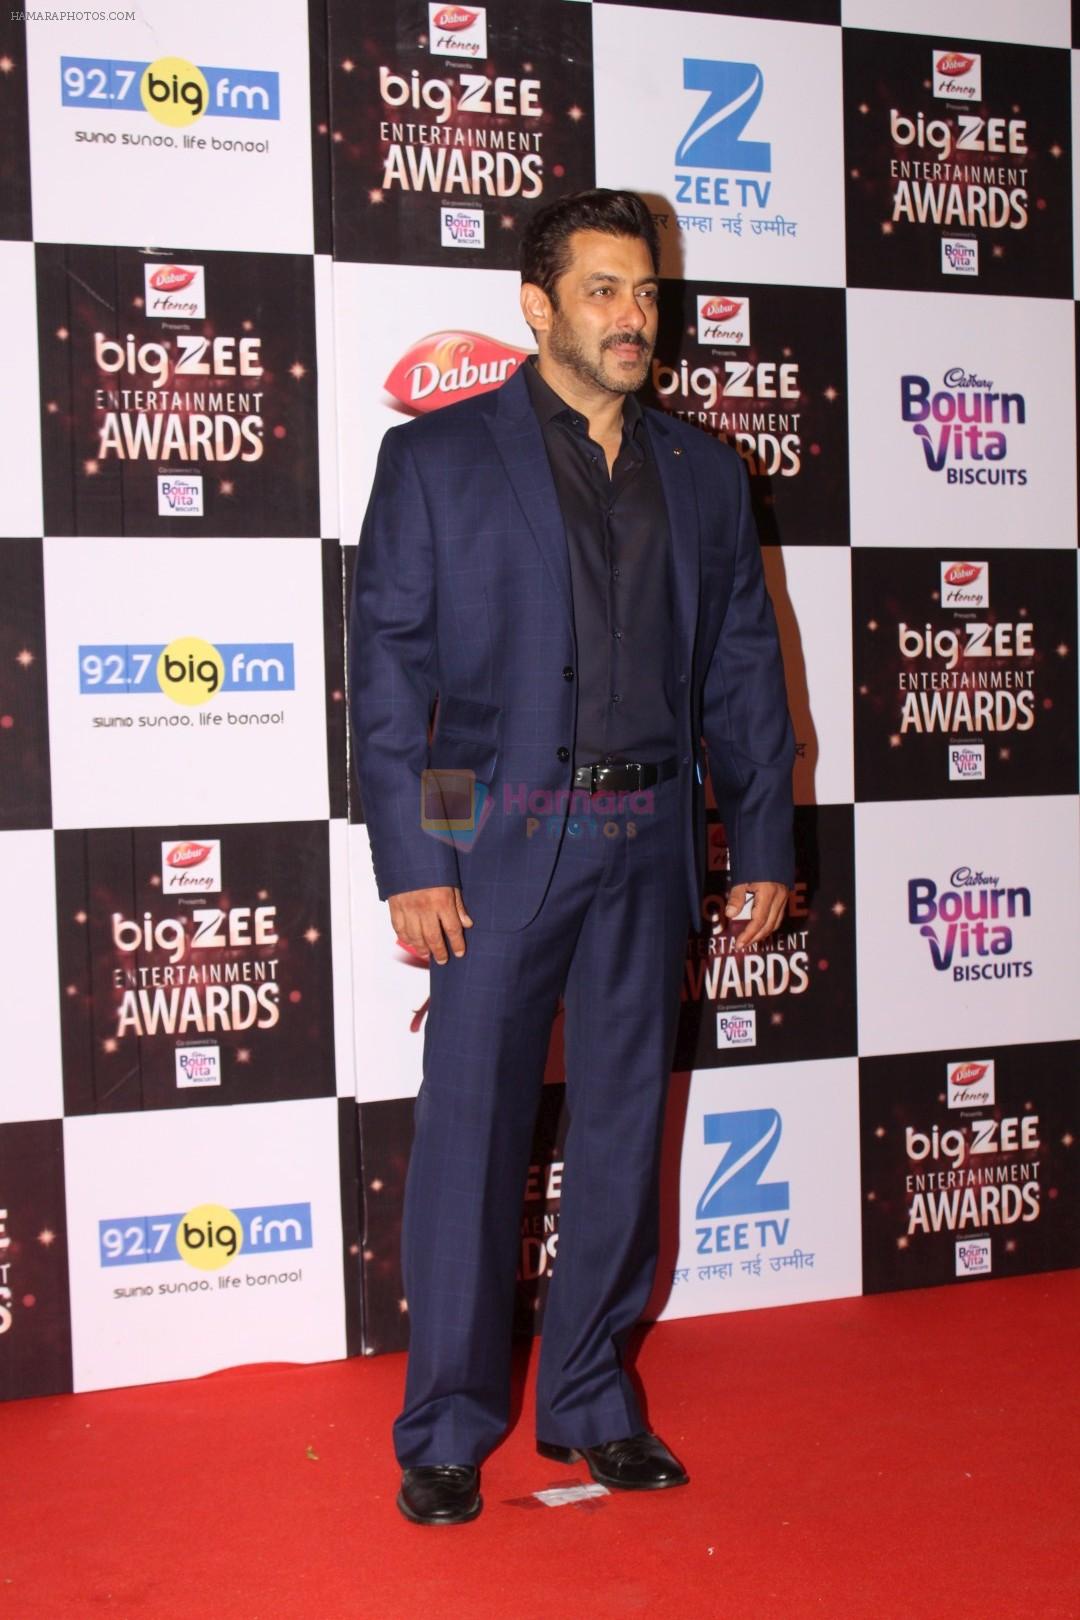 Salman Khan At Red Carpet Of Big Zee Entertainment Awards 2017 on 29th July 2017